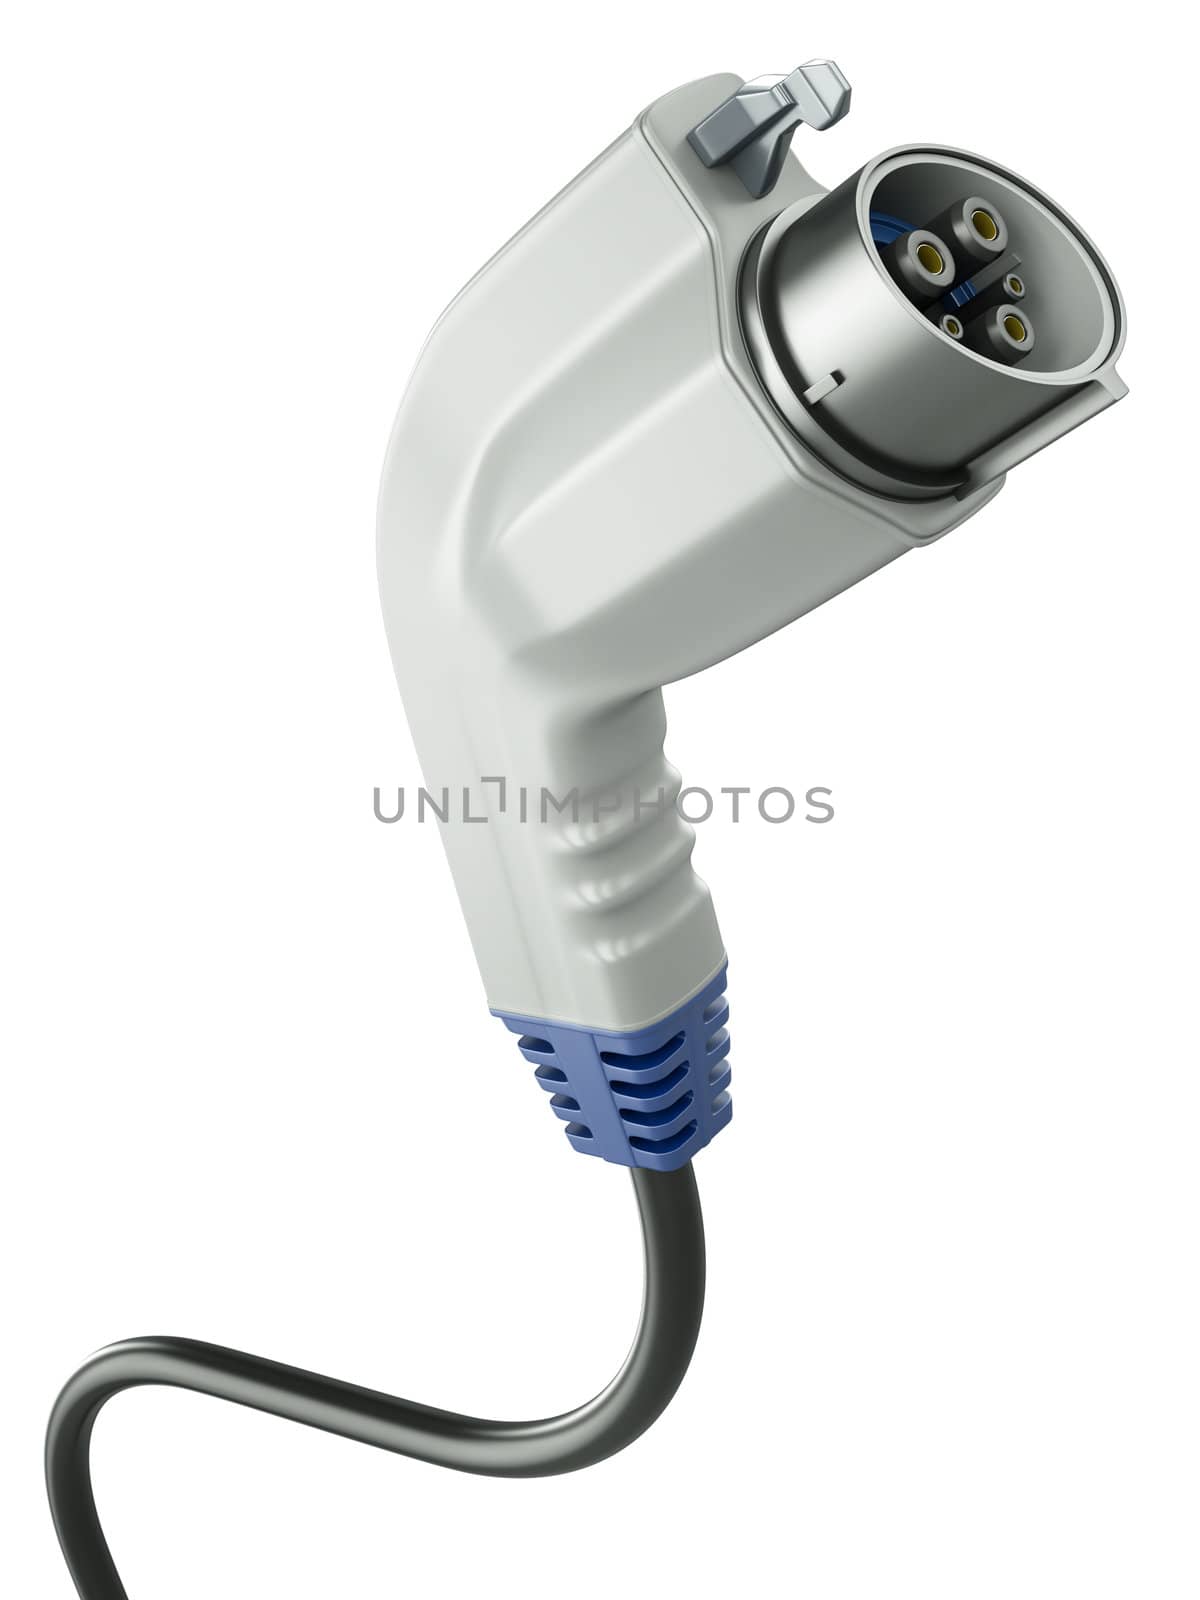 Closeup of electric car charging plug isolated on a white background. 3D render.
